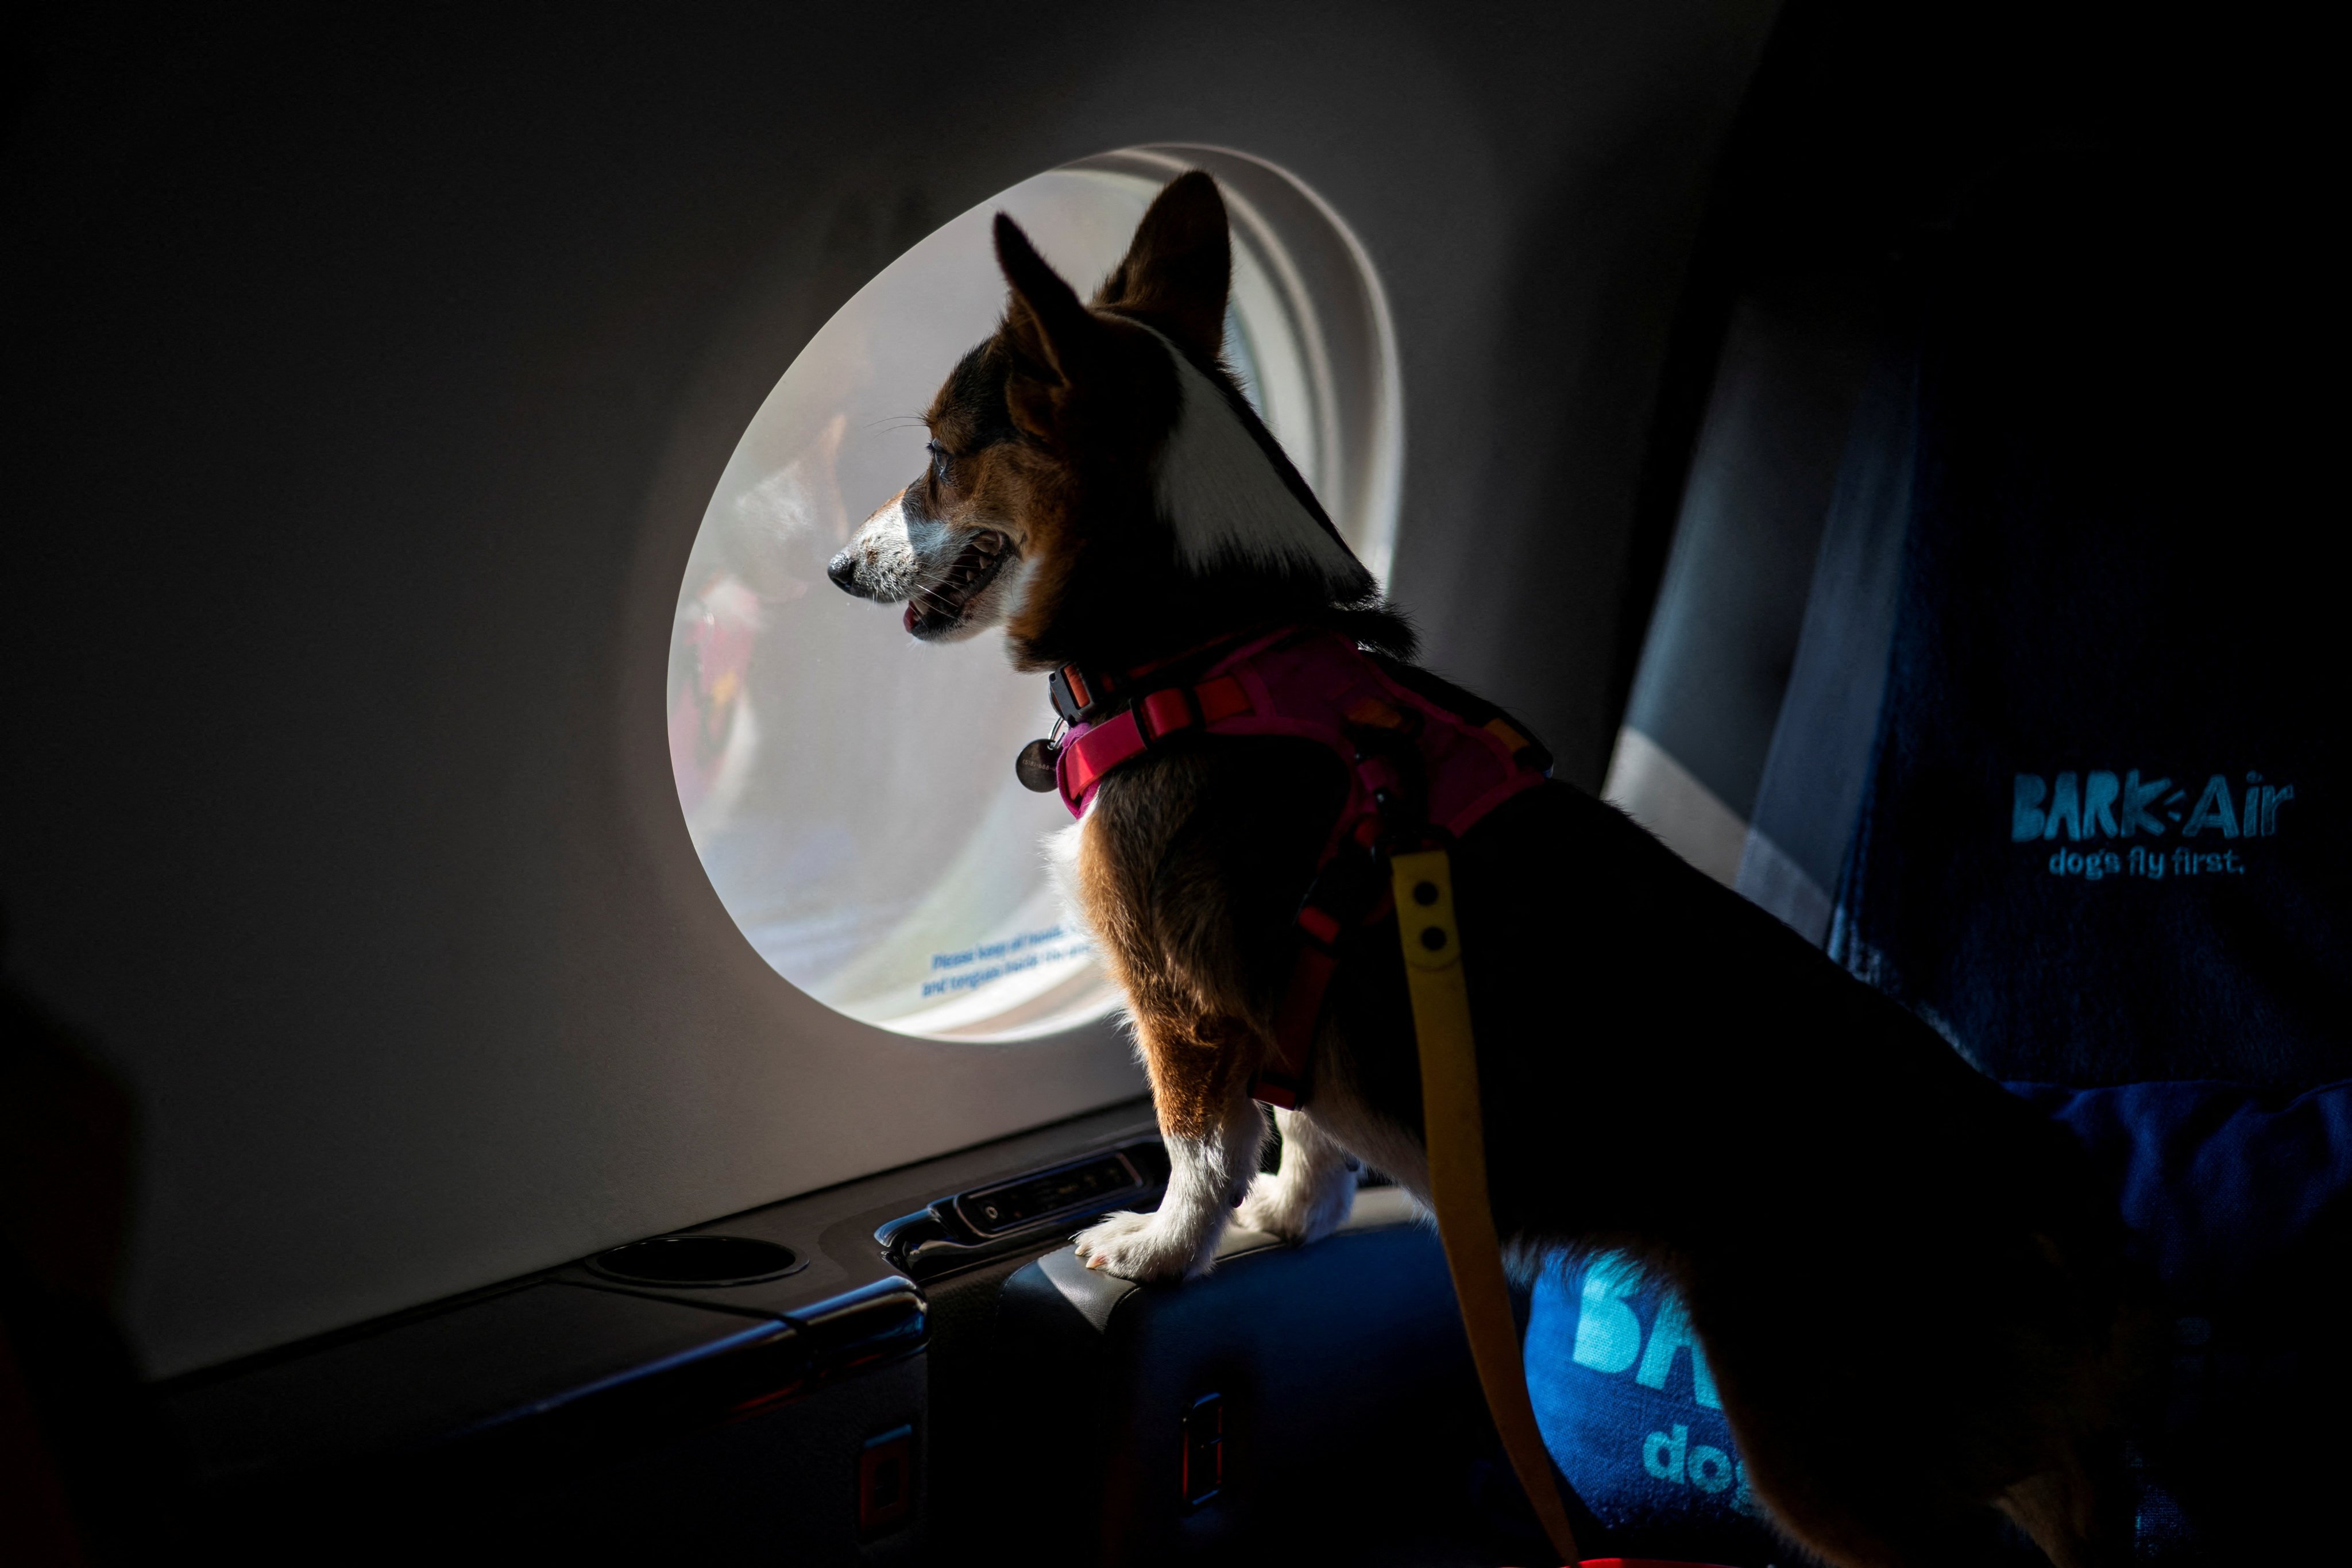 A dog looks out from a plane’s window during to introduce Bark Air, an airline for dogs. Photo: Reuters